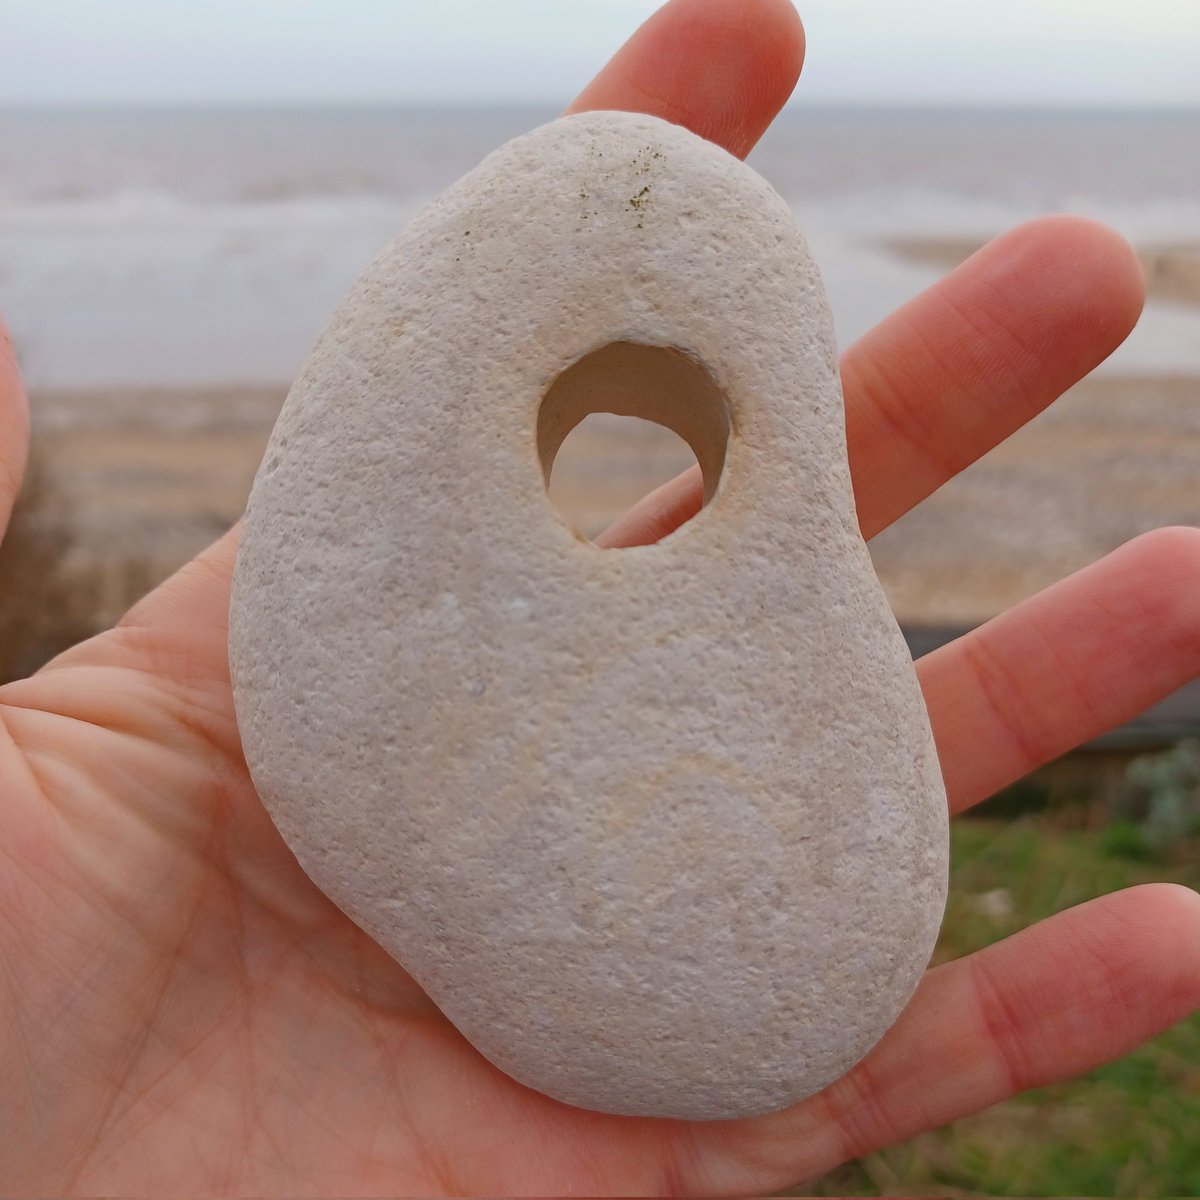 At the seaside, by a beach of pebbles, it's obligatory to play the Barbara @HepworthGallery game. Here's my best find.